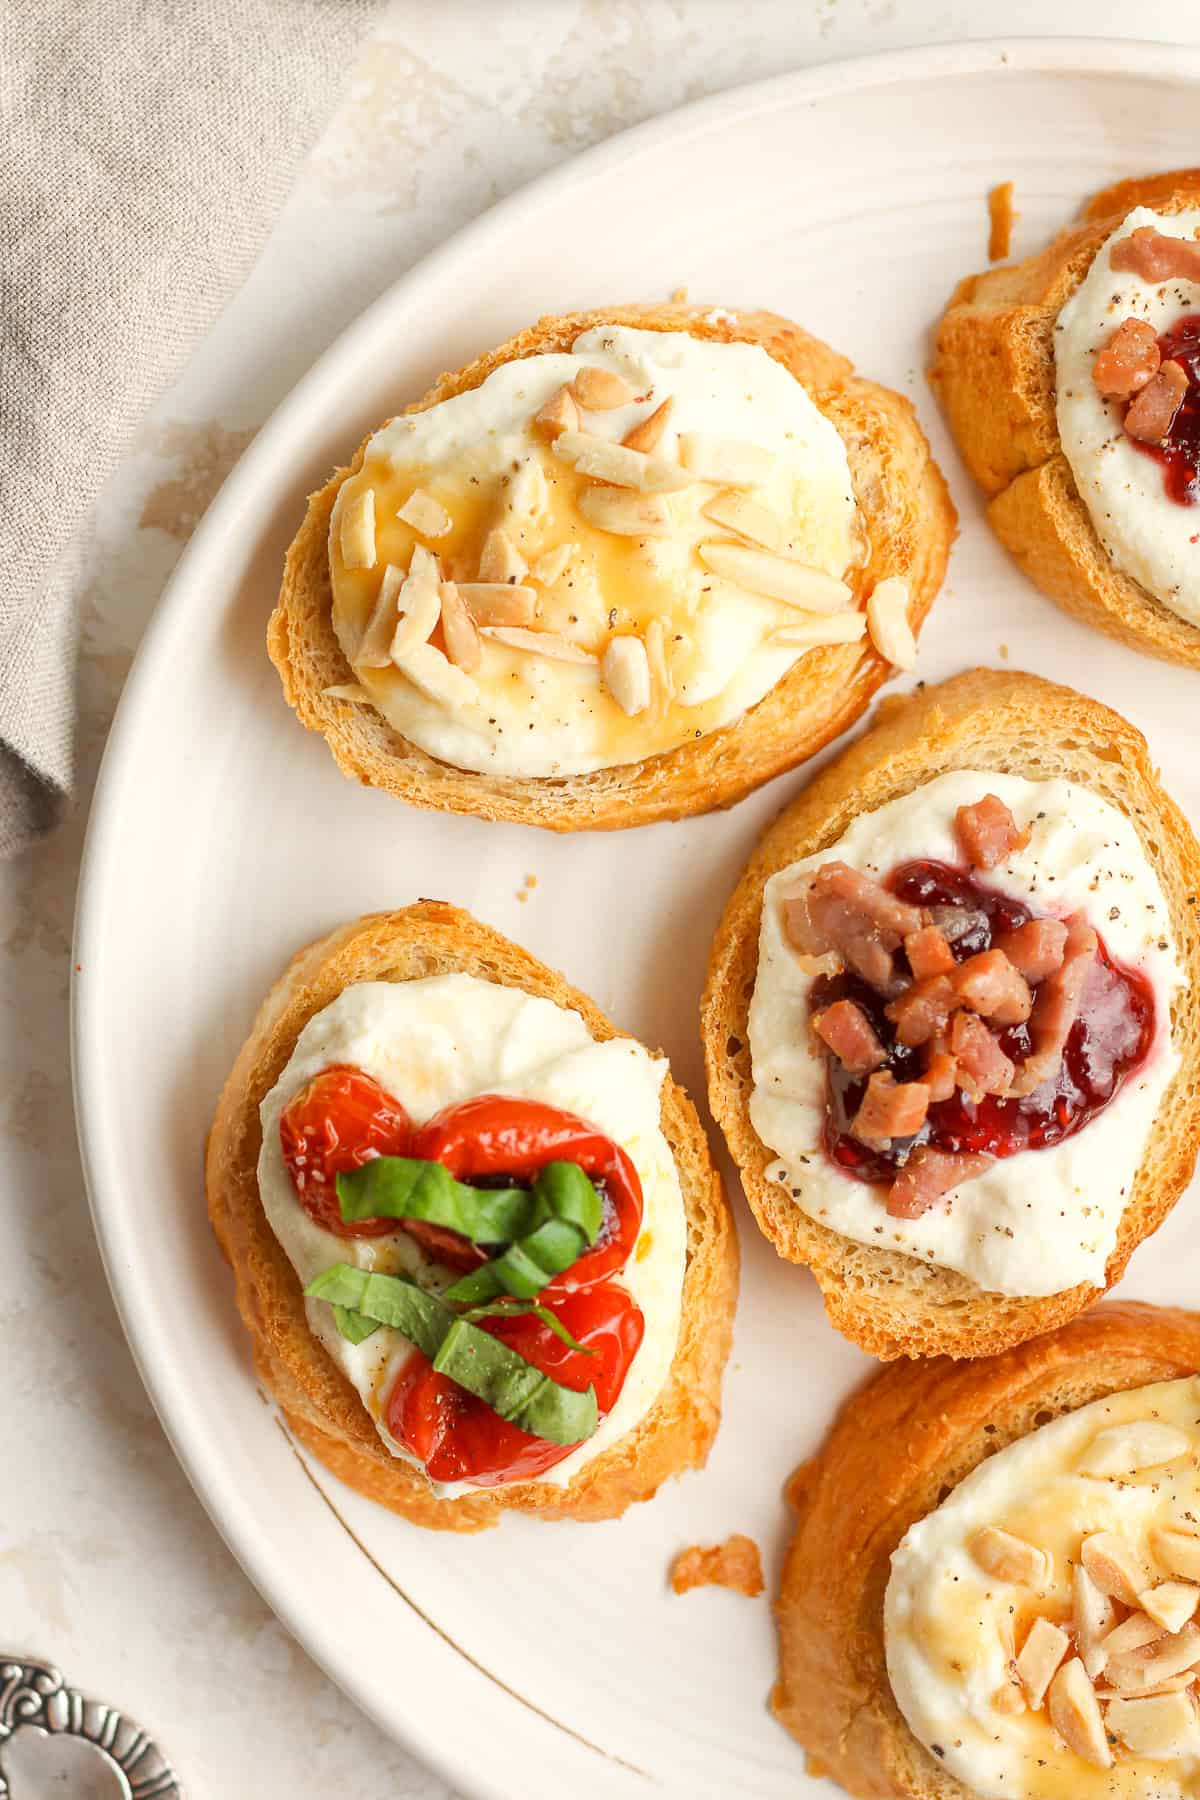 A shot of a partial plate of ricotta crostini with different toppings.